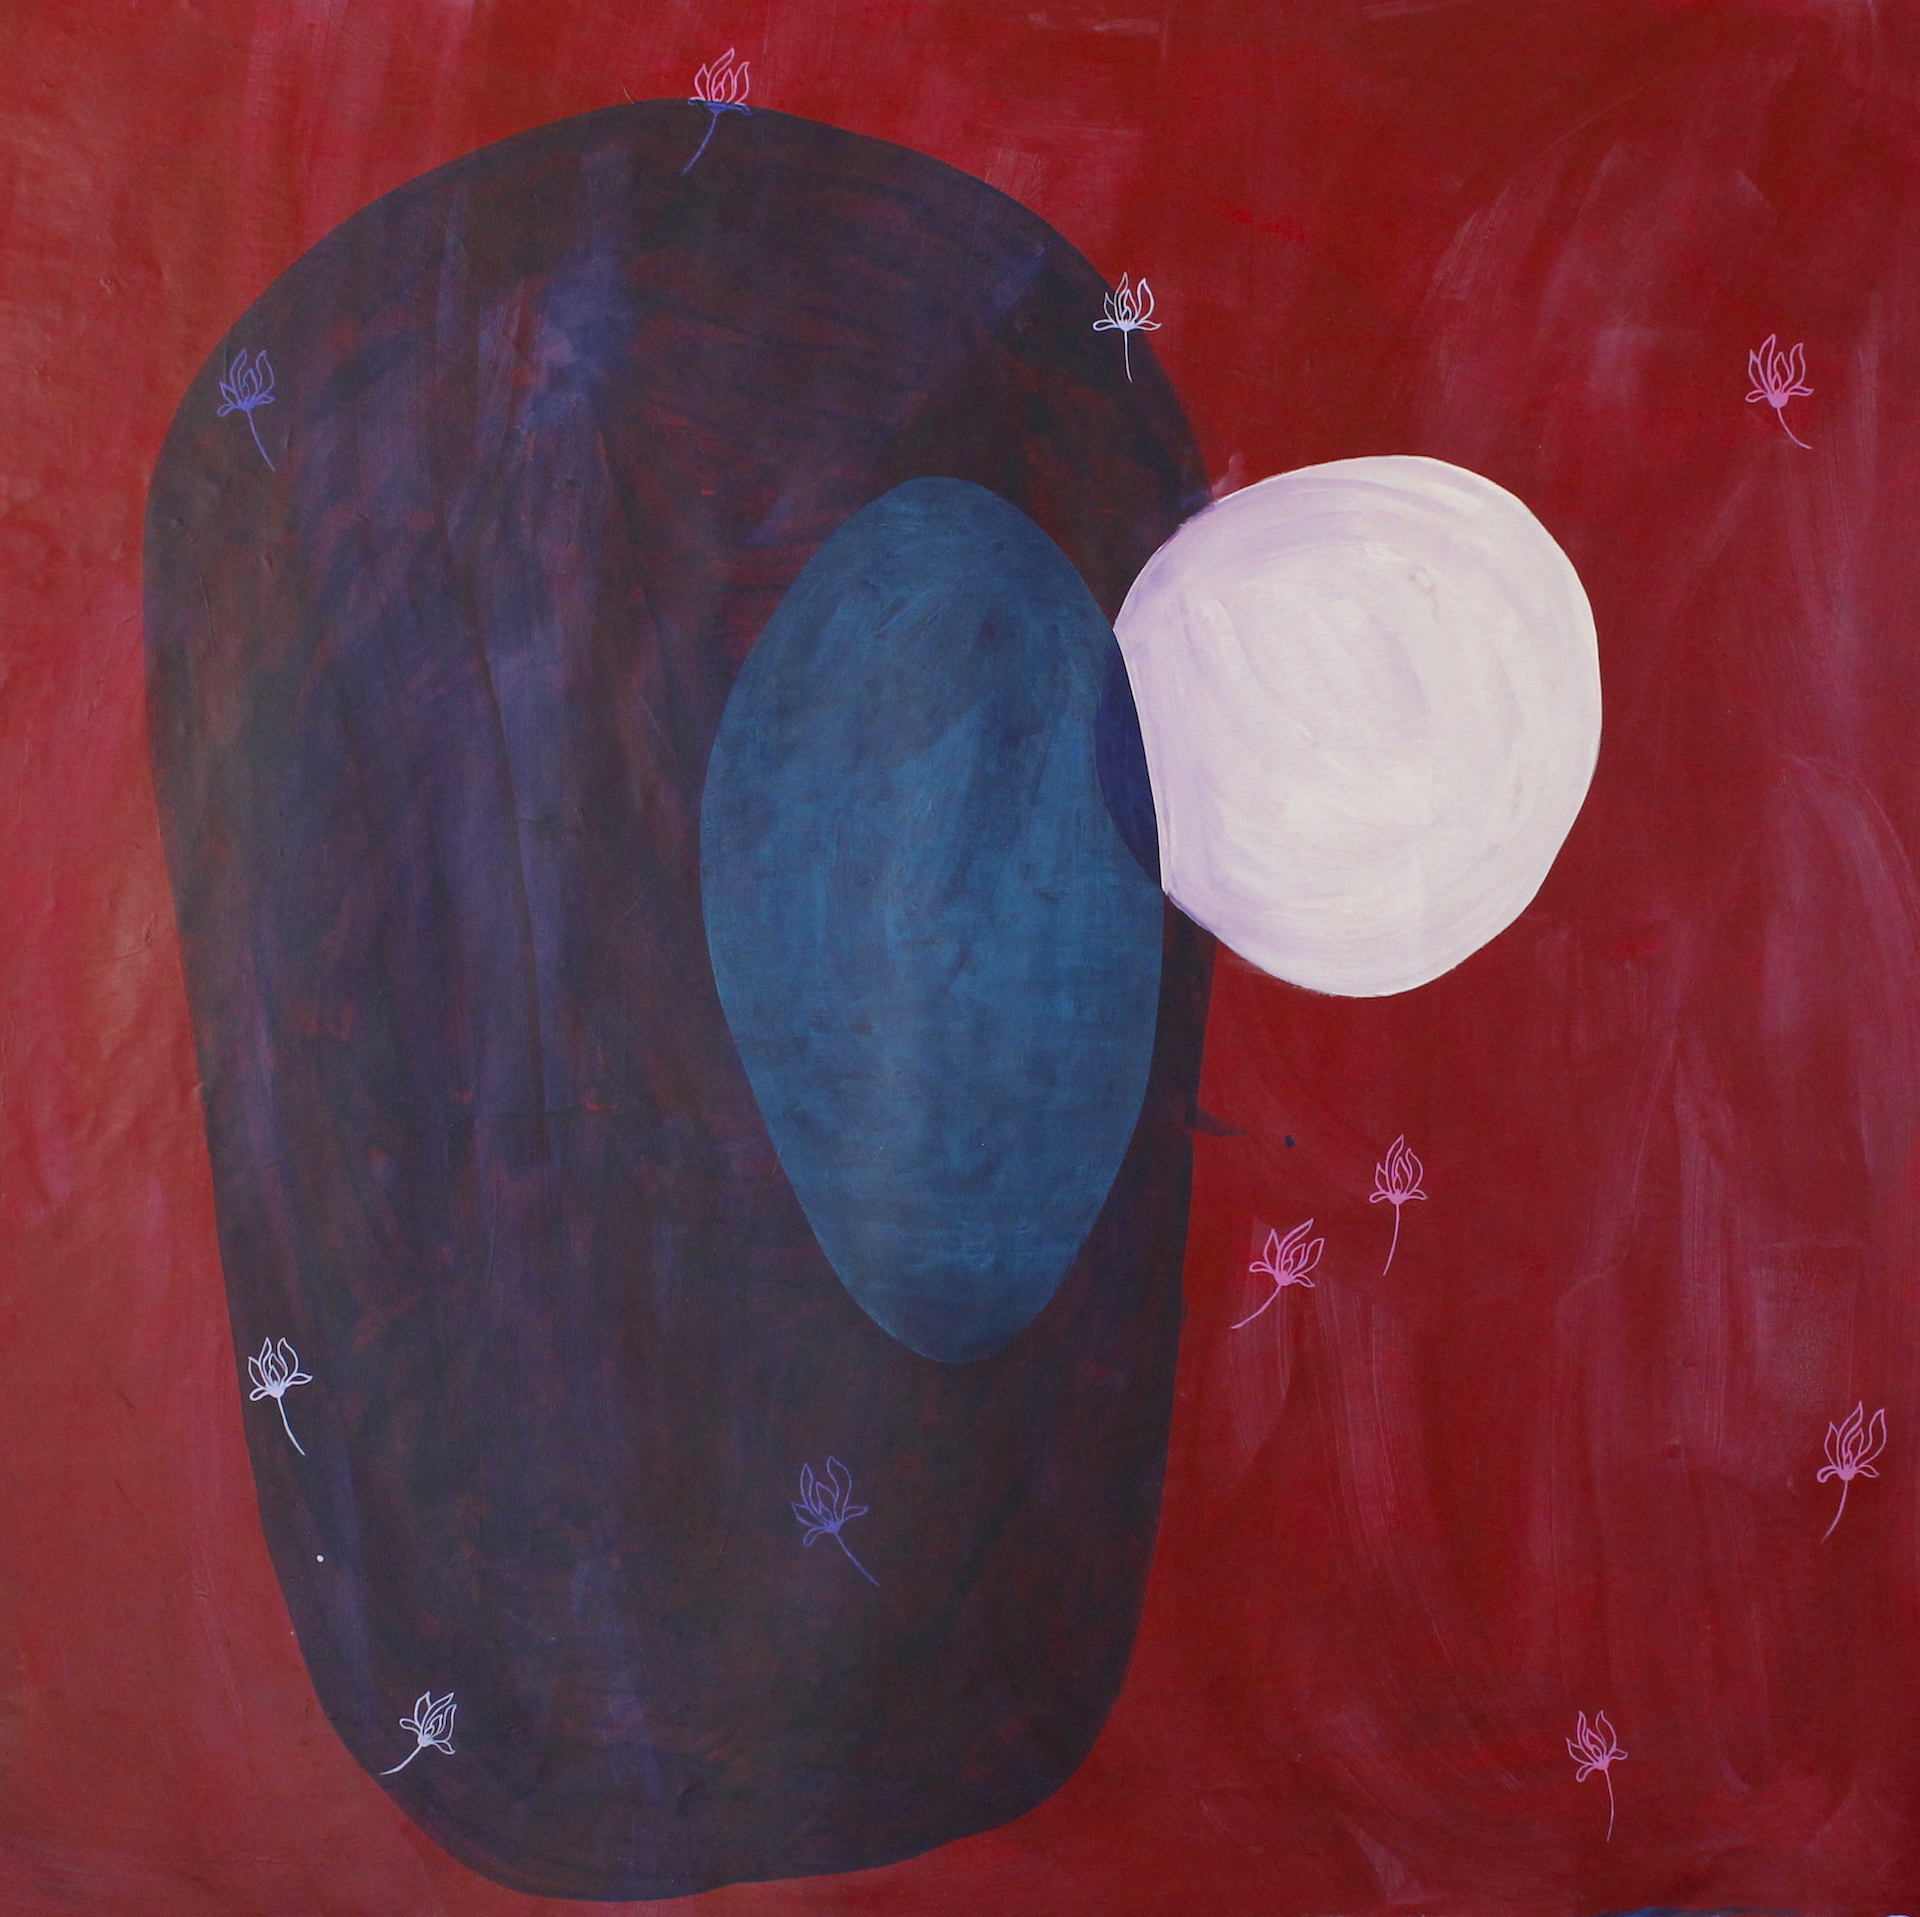 Painting with red background, large blue circle in center with a white circle on the right